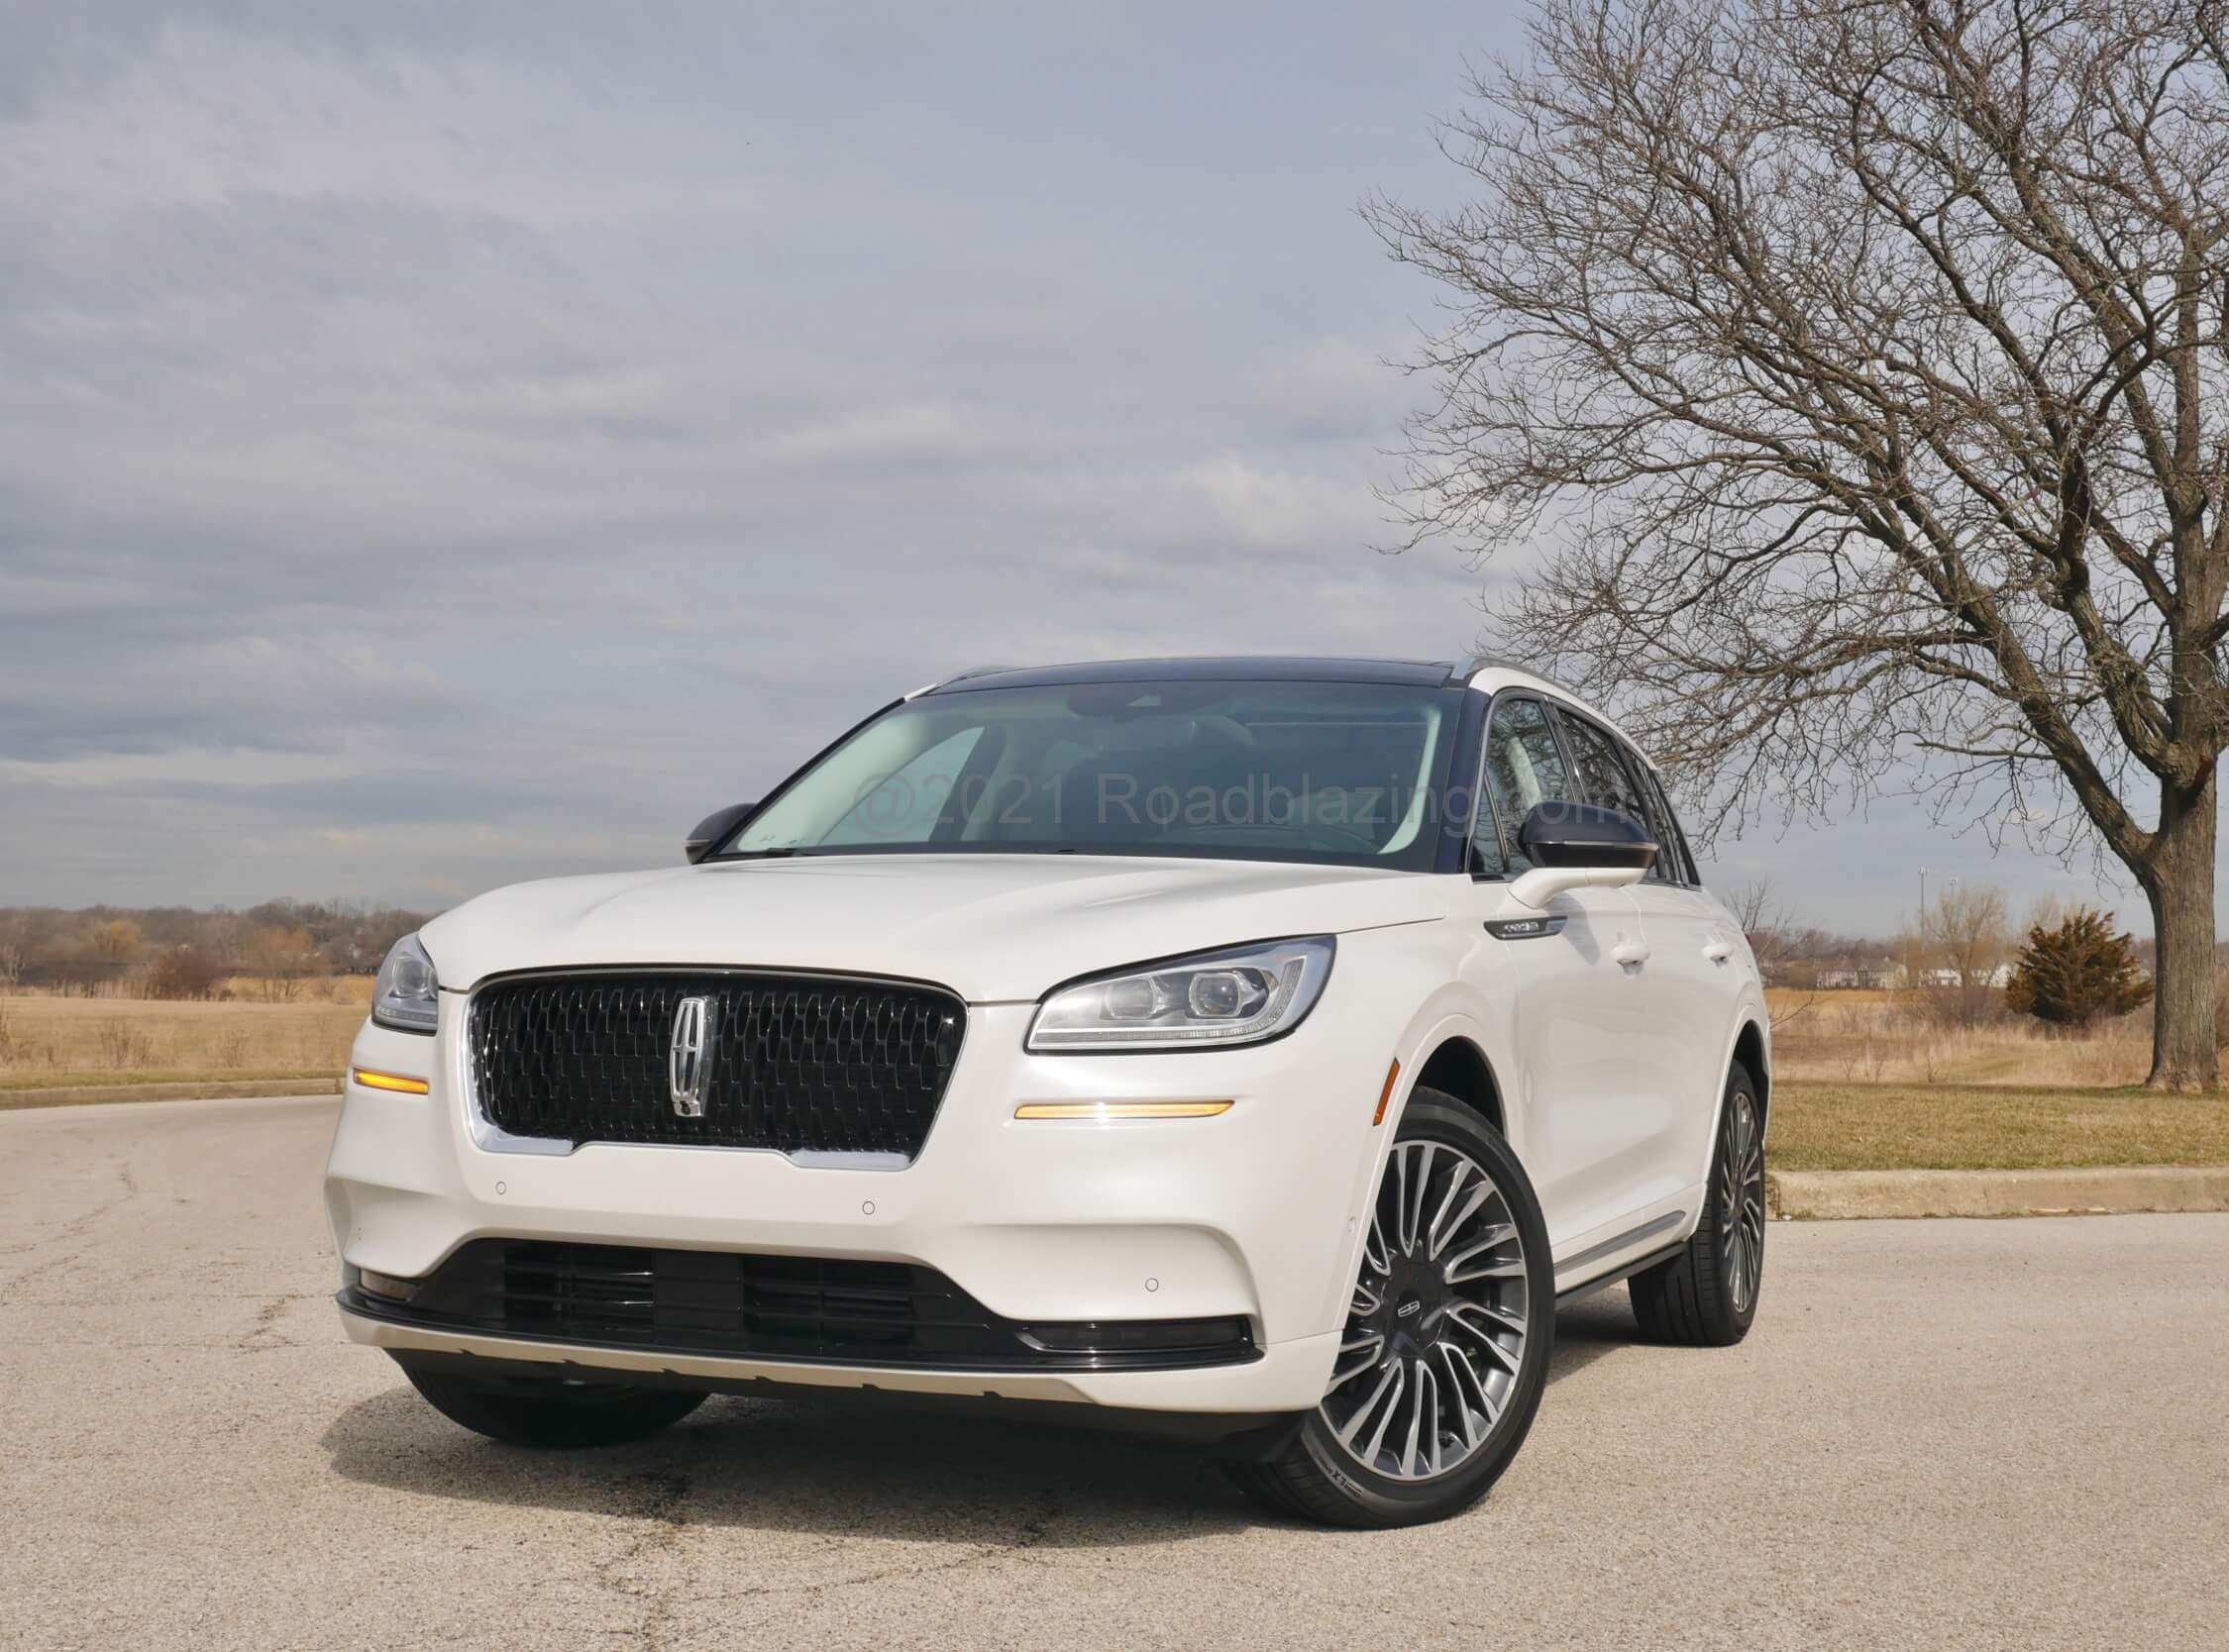 2021 Lincoln Corsair 2.3T AWD Reserve: For the discerning taste in modest grilles